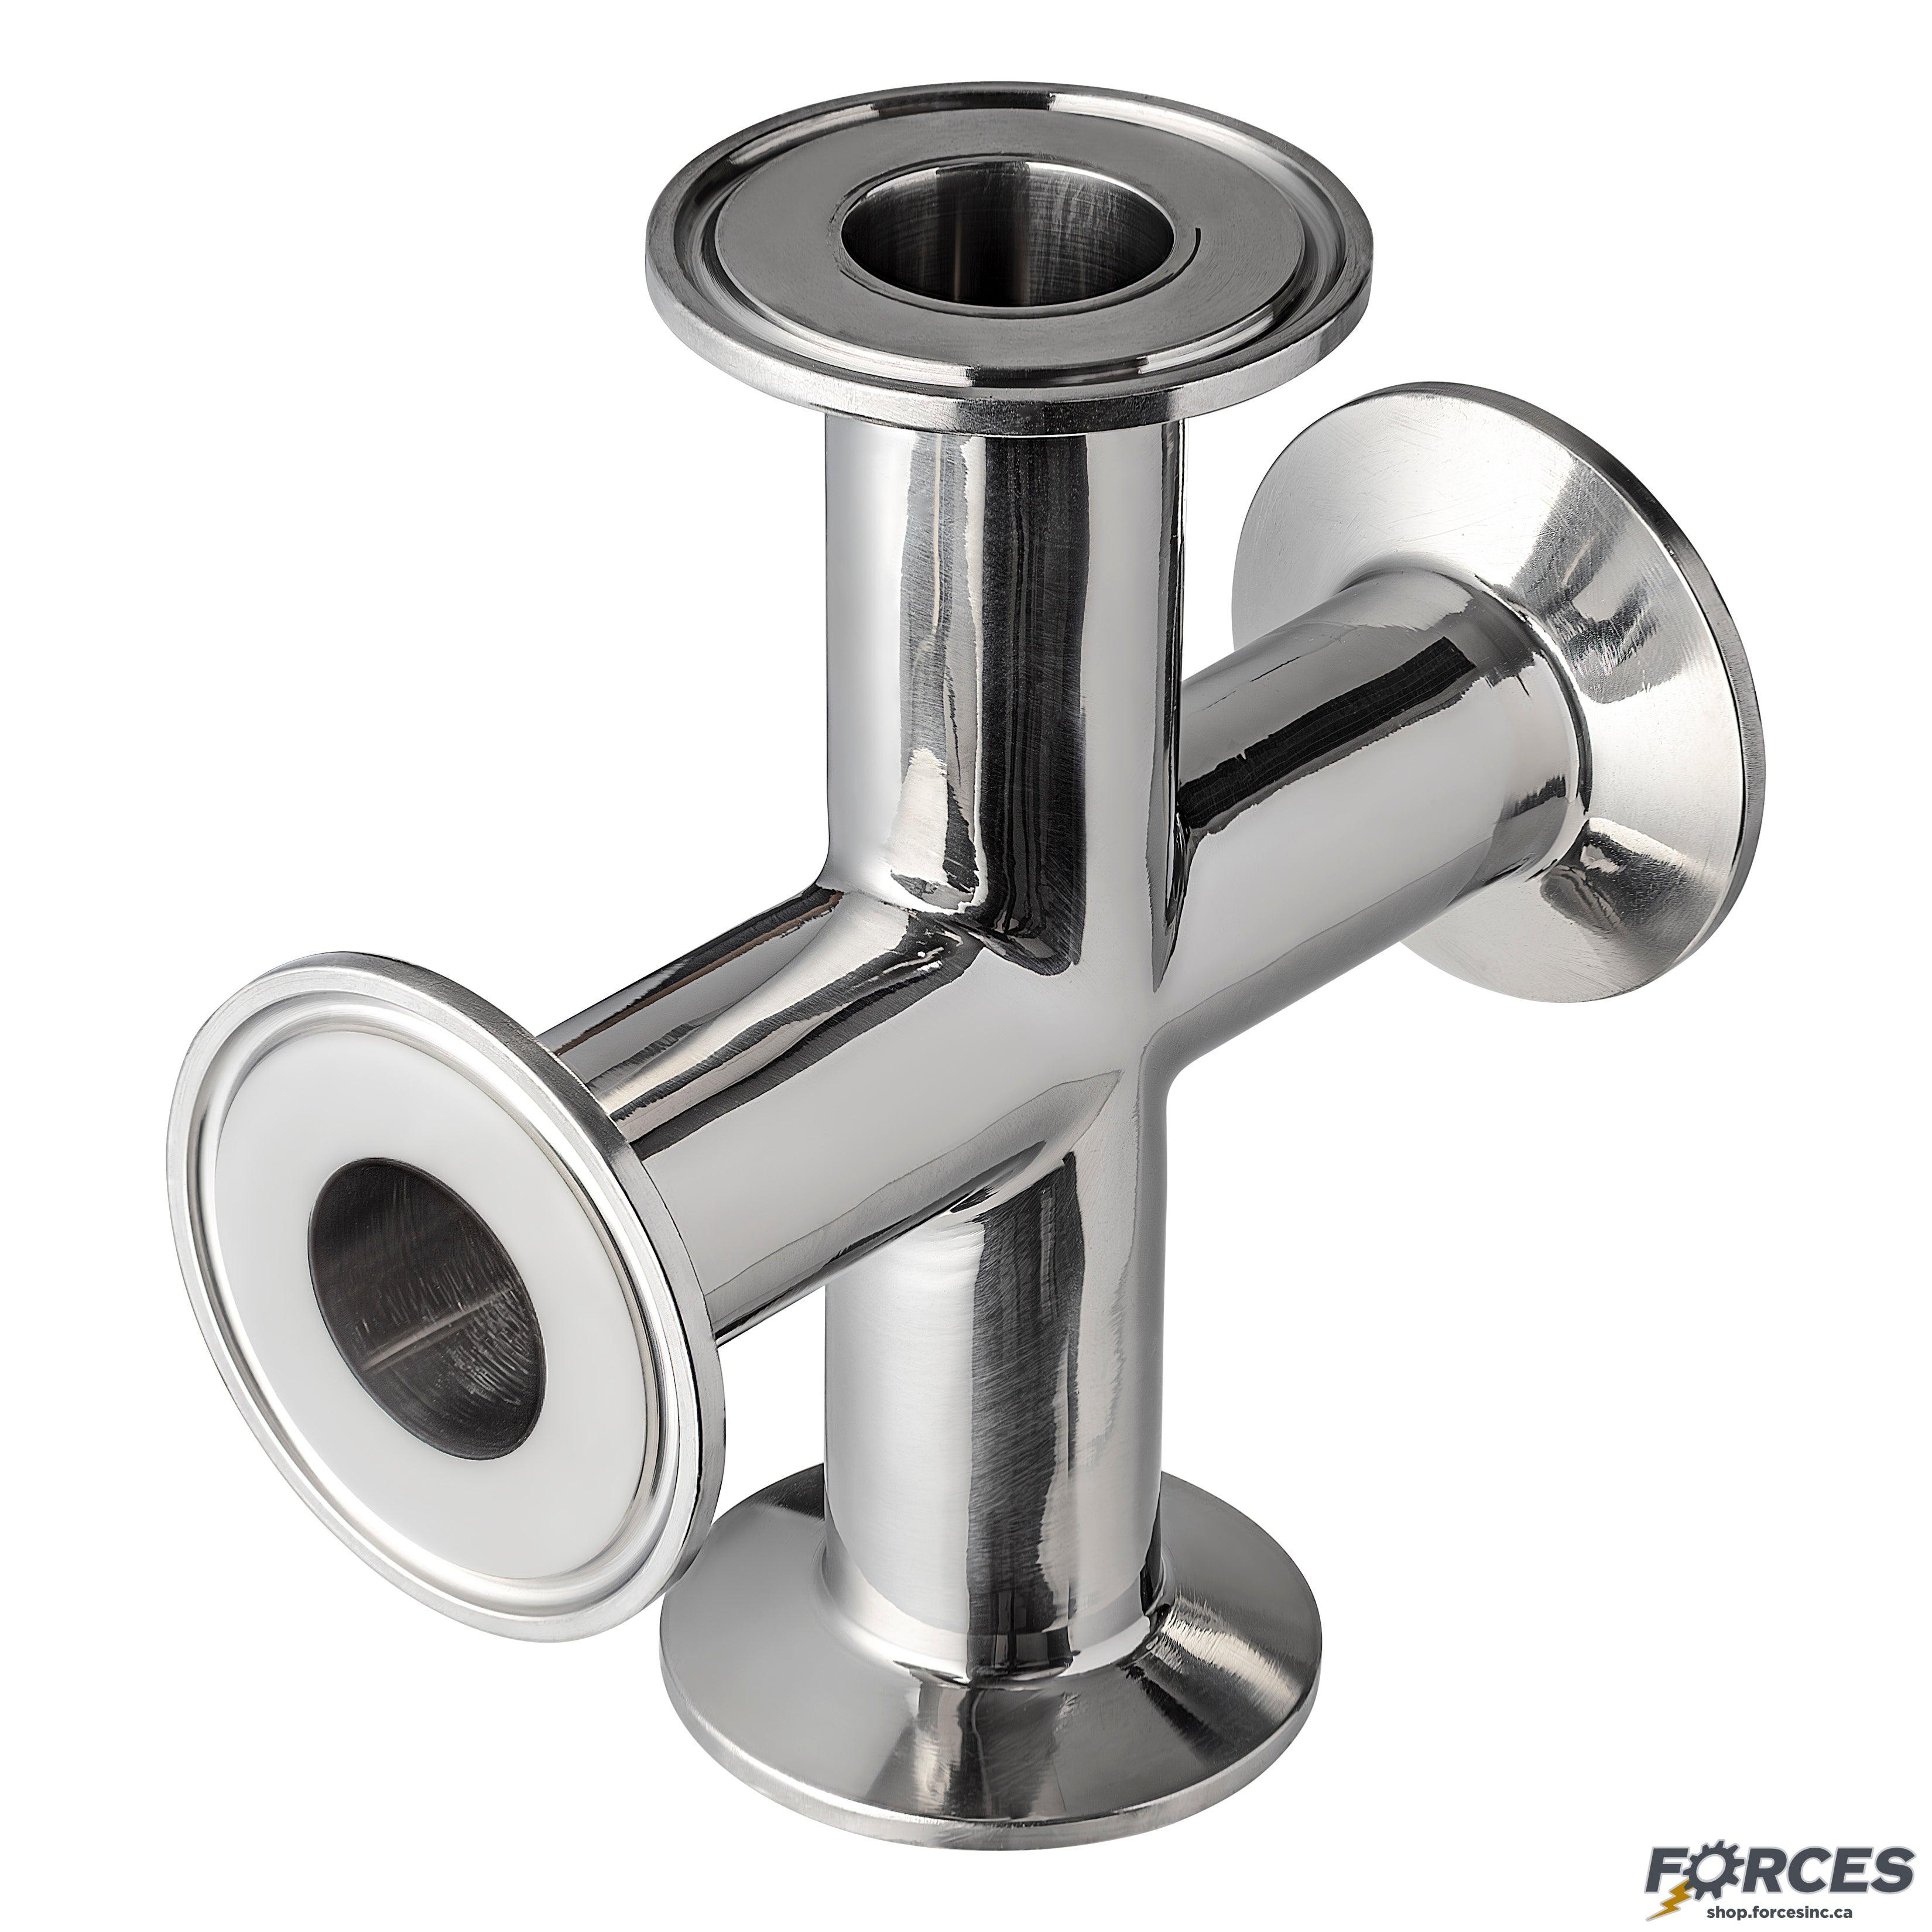 2-1/2" Tri-Clamp Cross - Stainless Steel 316 - Forces Inc